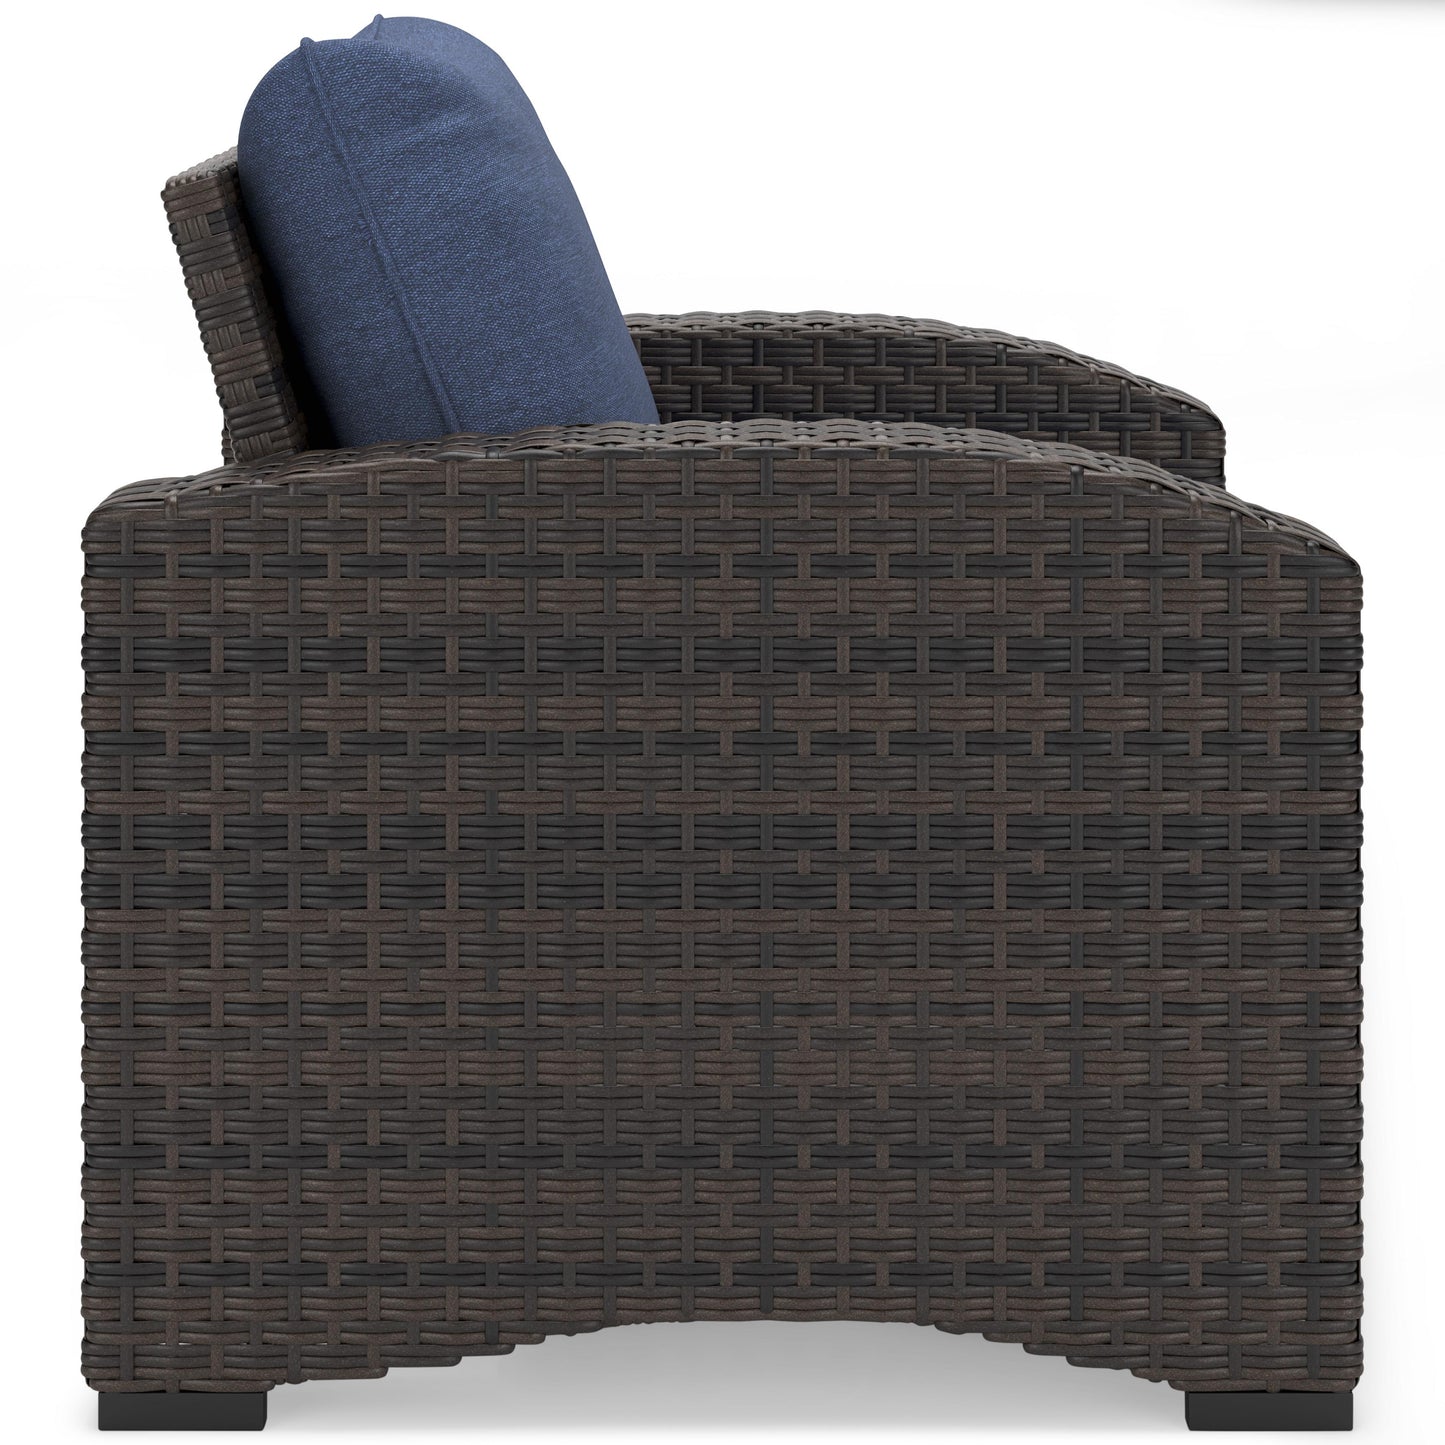 Signature Design by Ashley Outdoor Seating Lounge Chairs P340-820 IMAGE 3